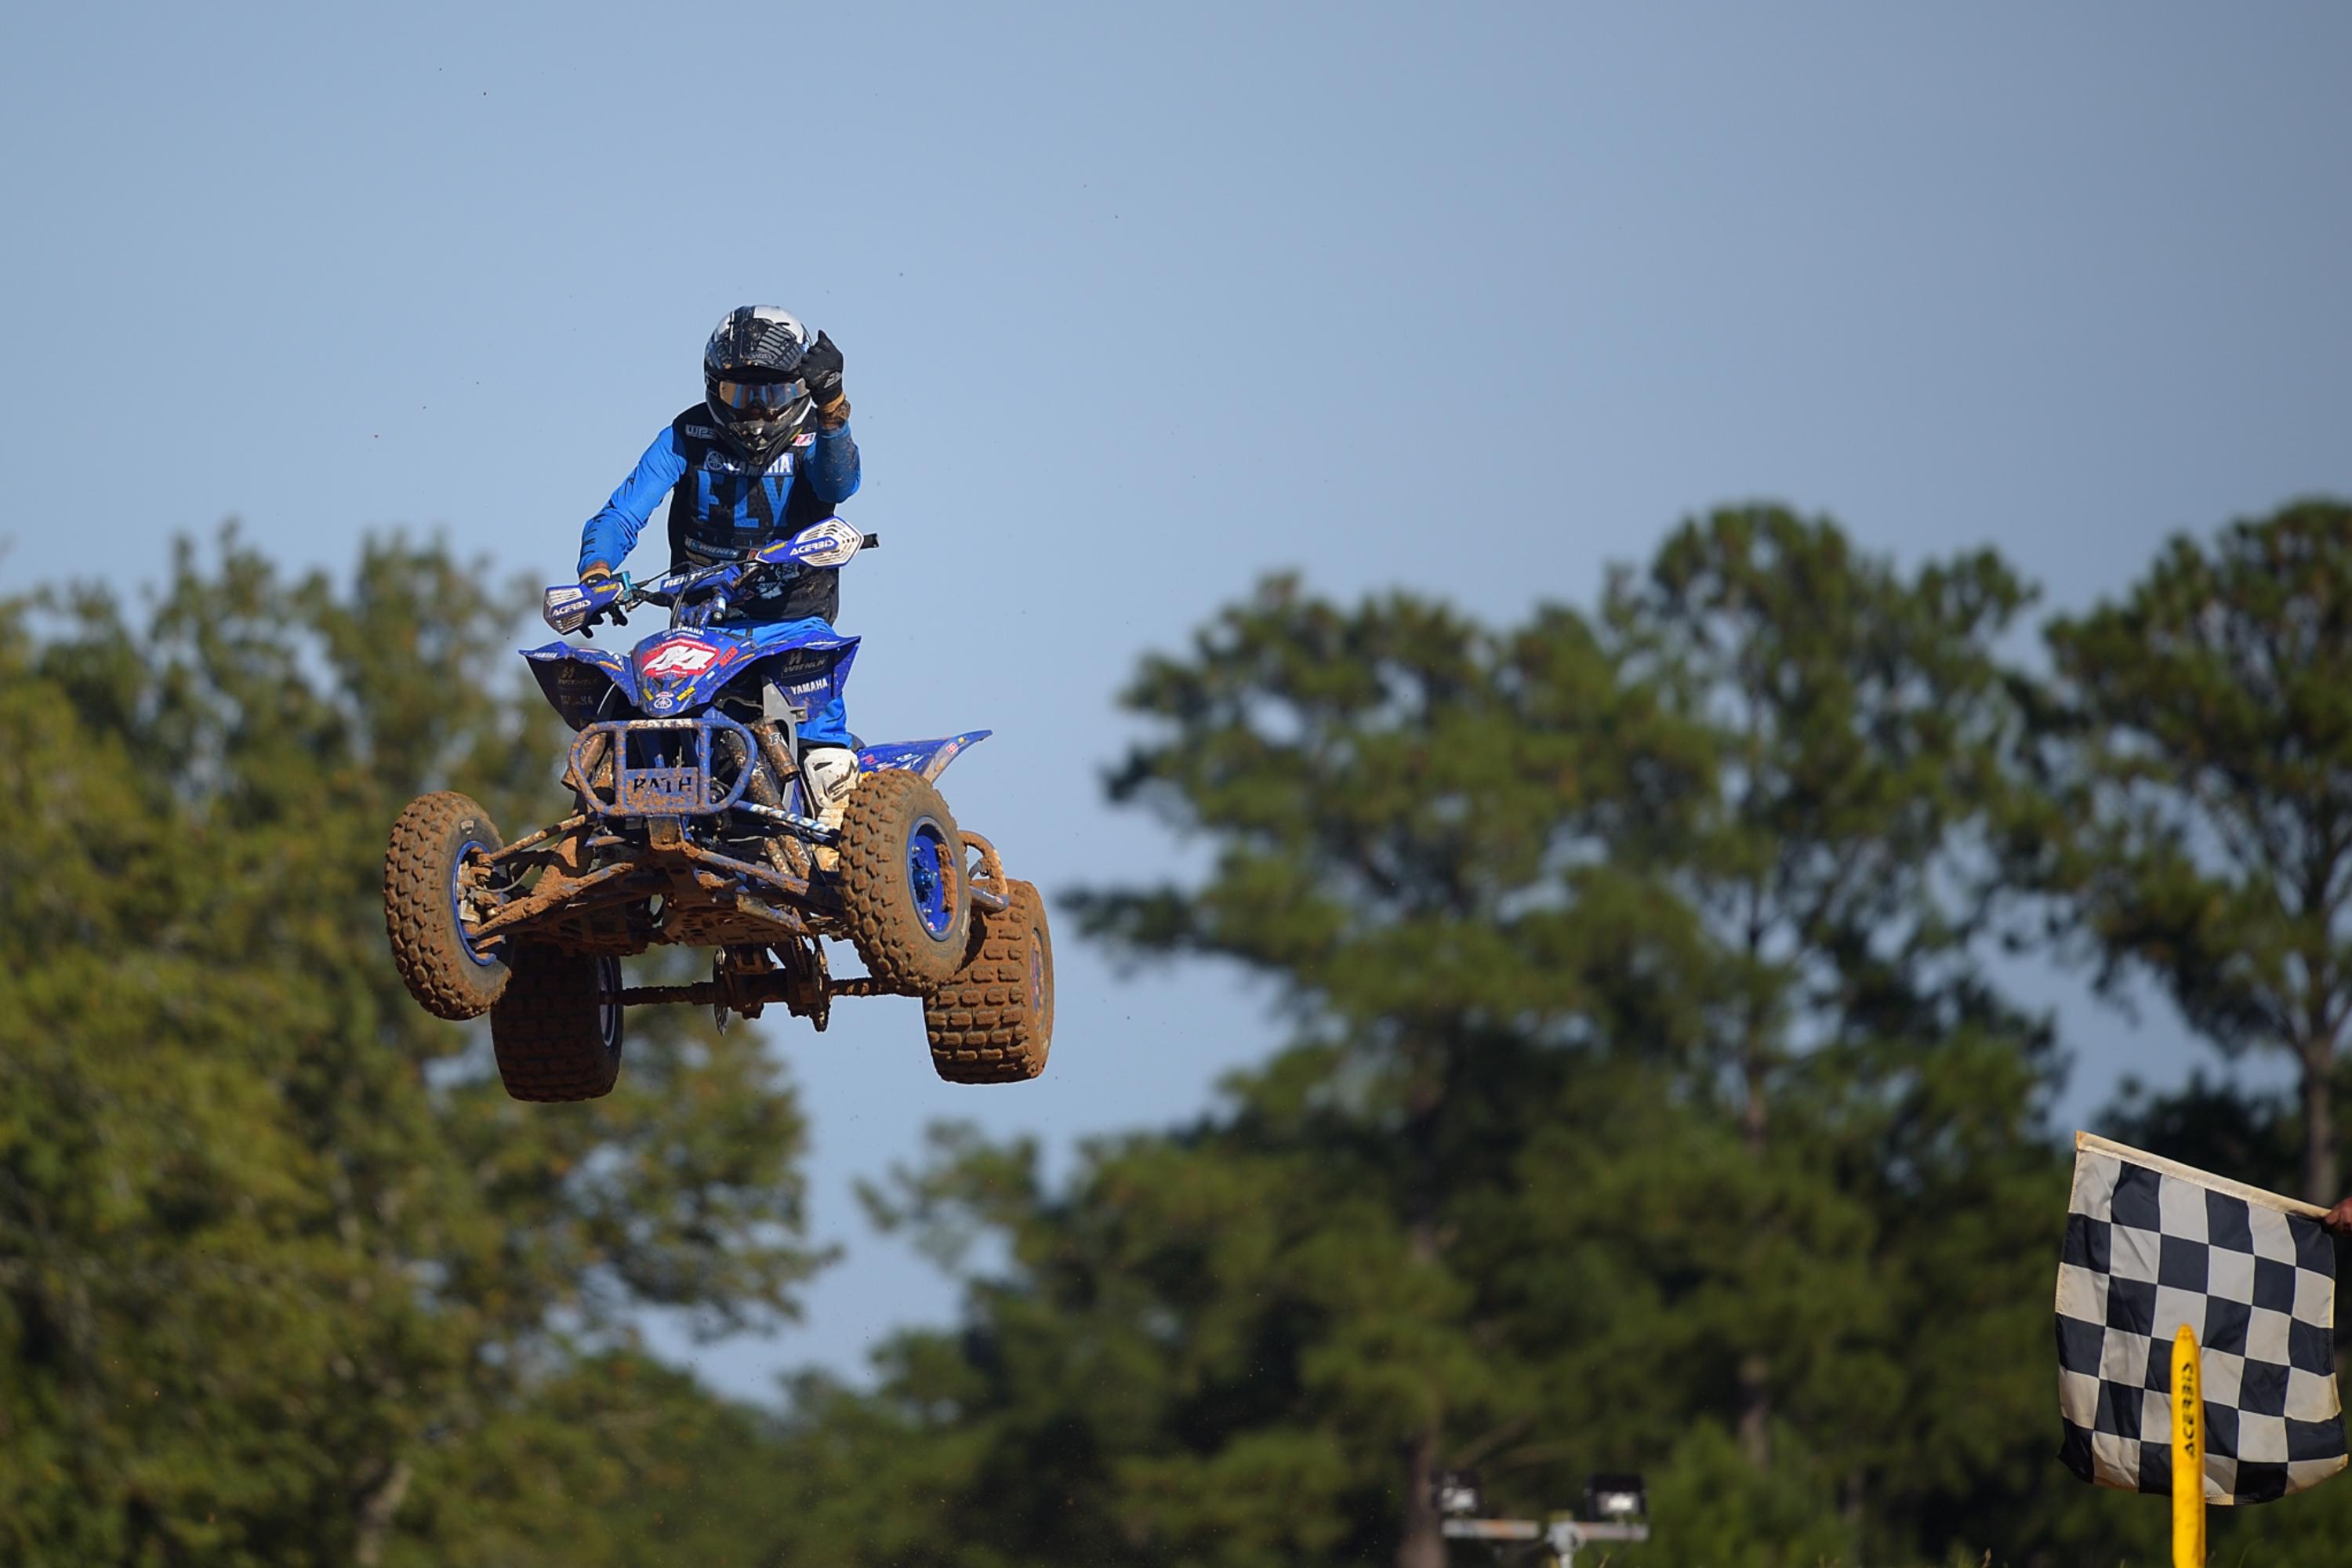 Chad Wienen Clinches Seventh ATV Motocross National Championship